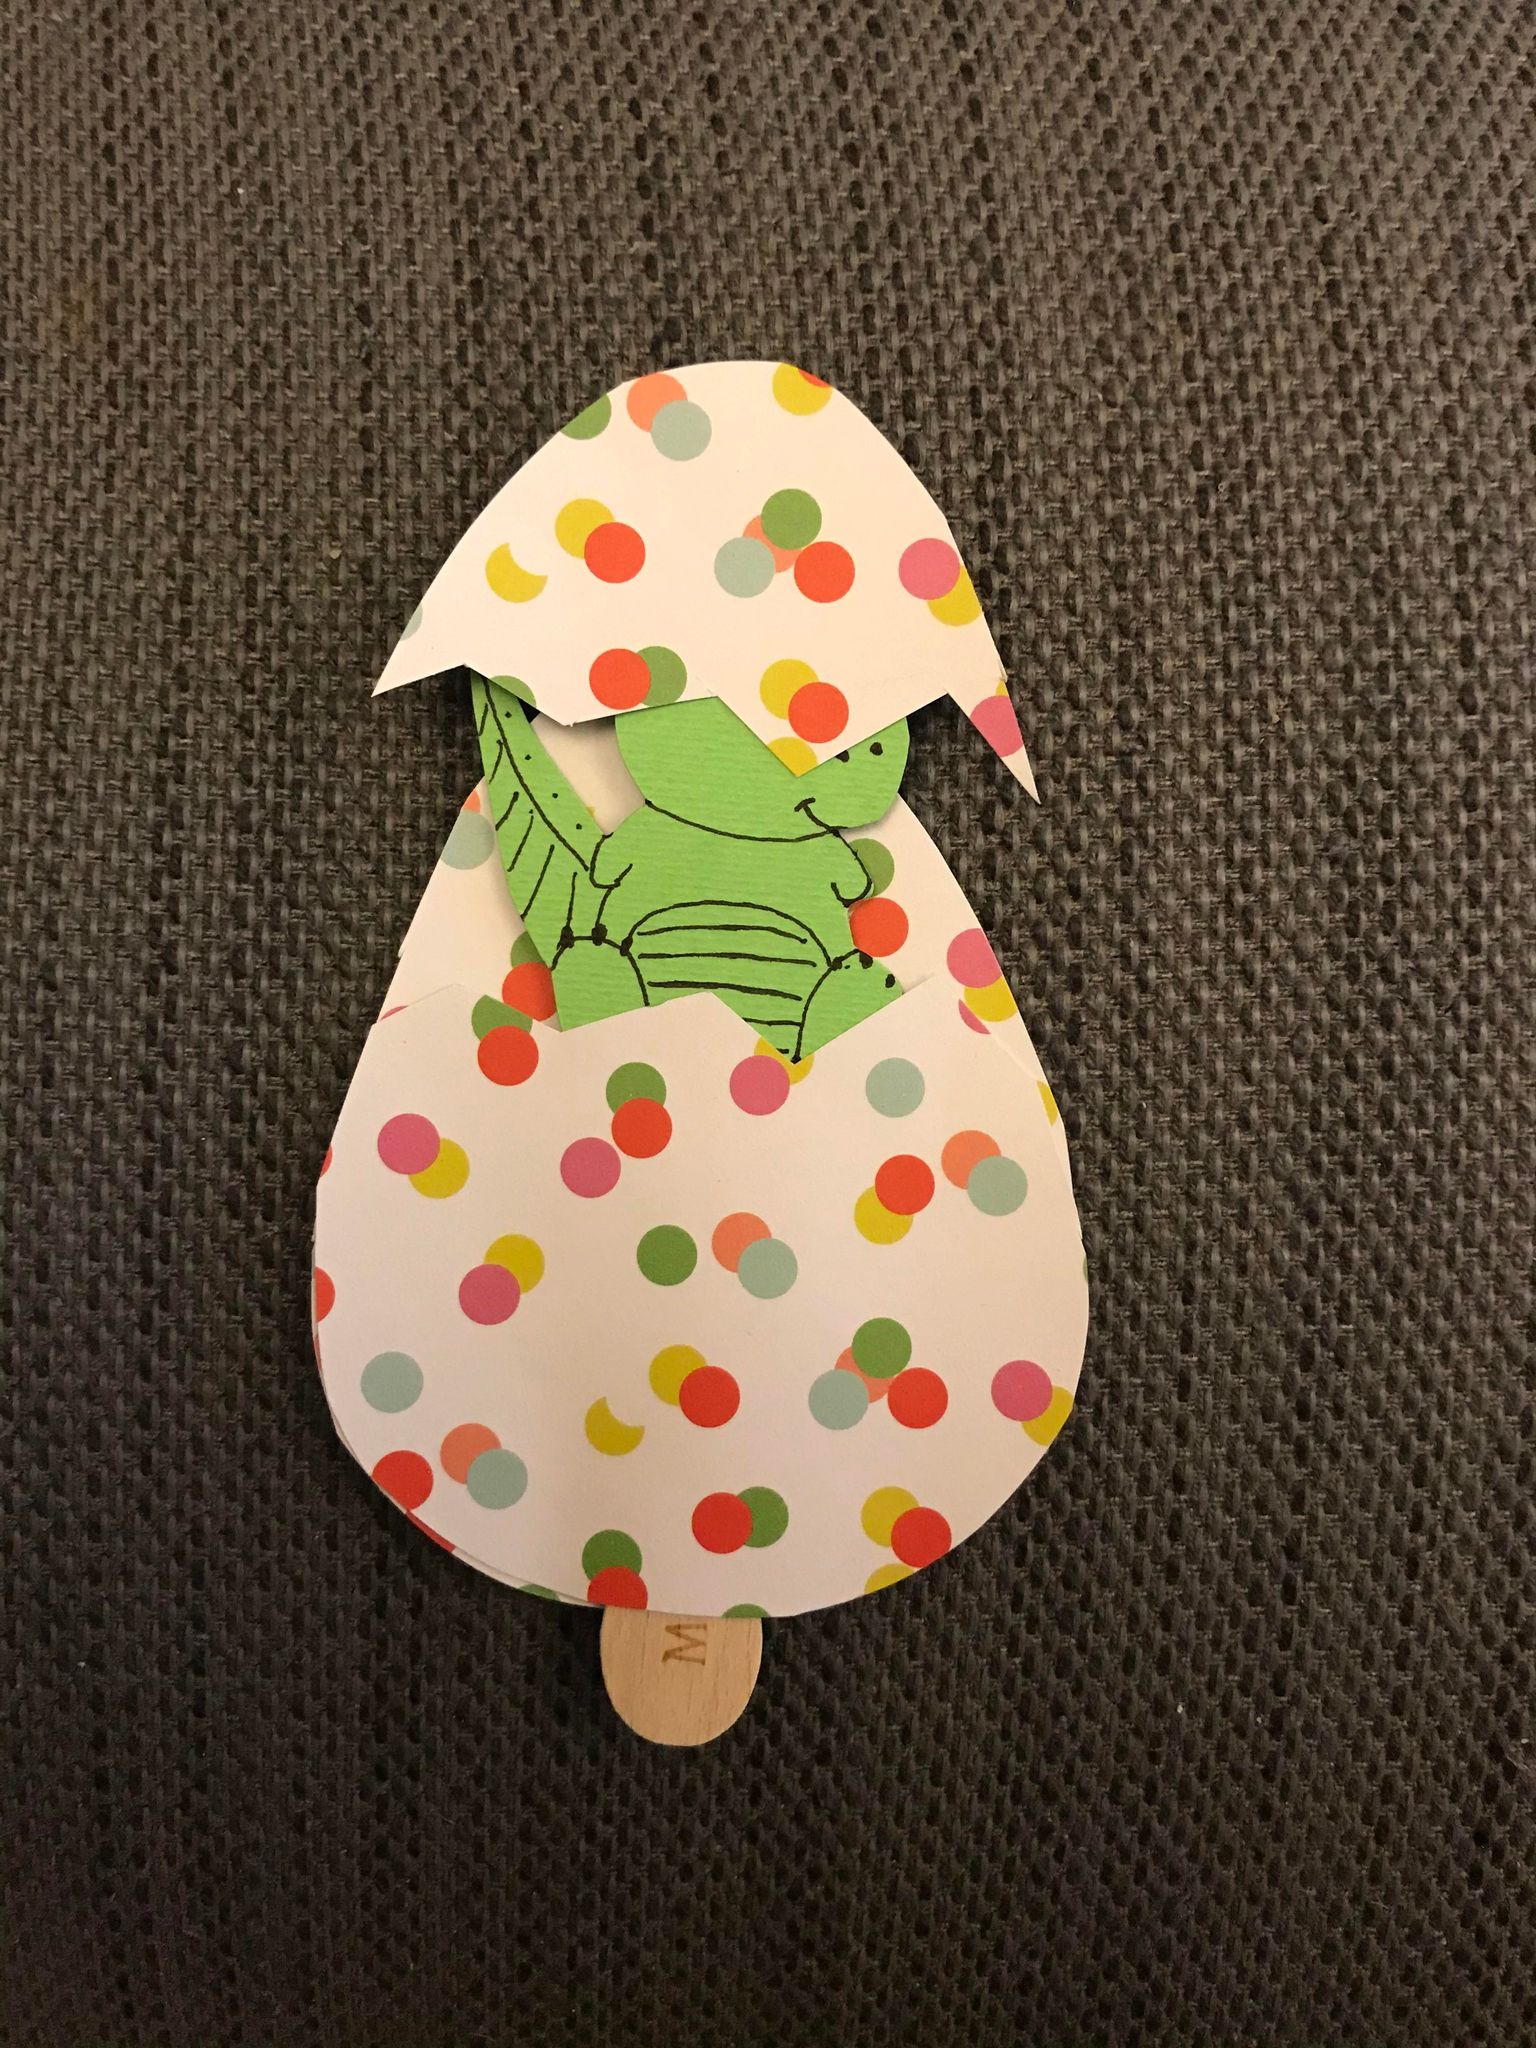 Close-up of the finished dinosaur craft; the top egg piece has caught over the little dino's eyes in an endearing sort of way.